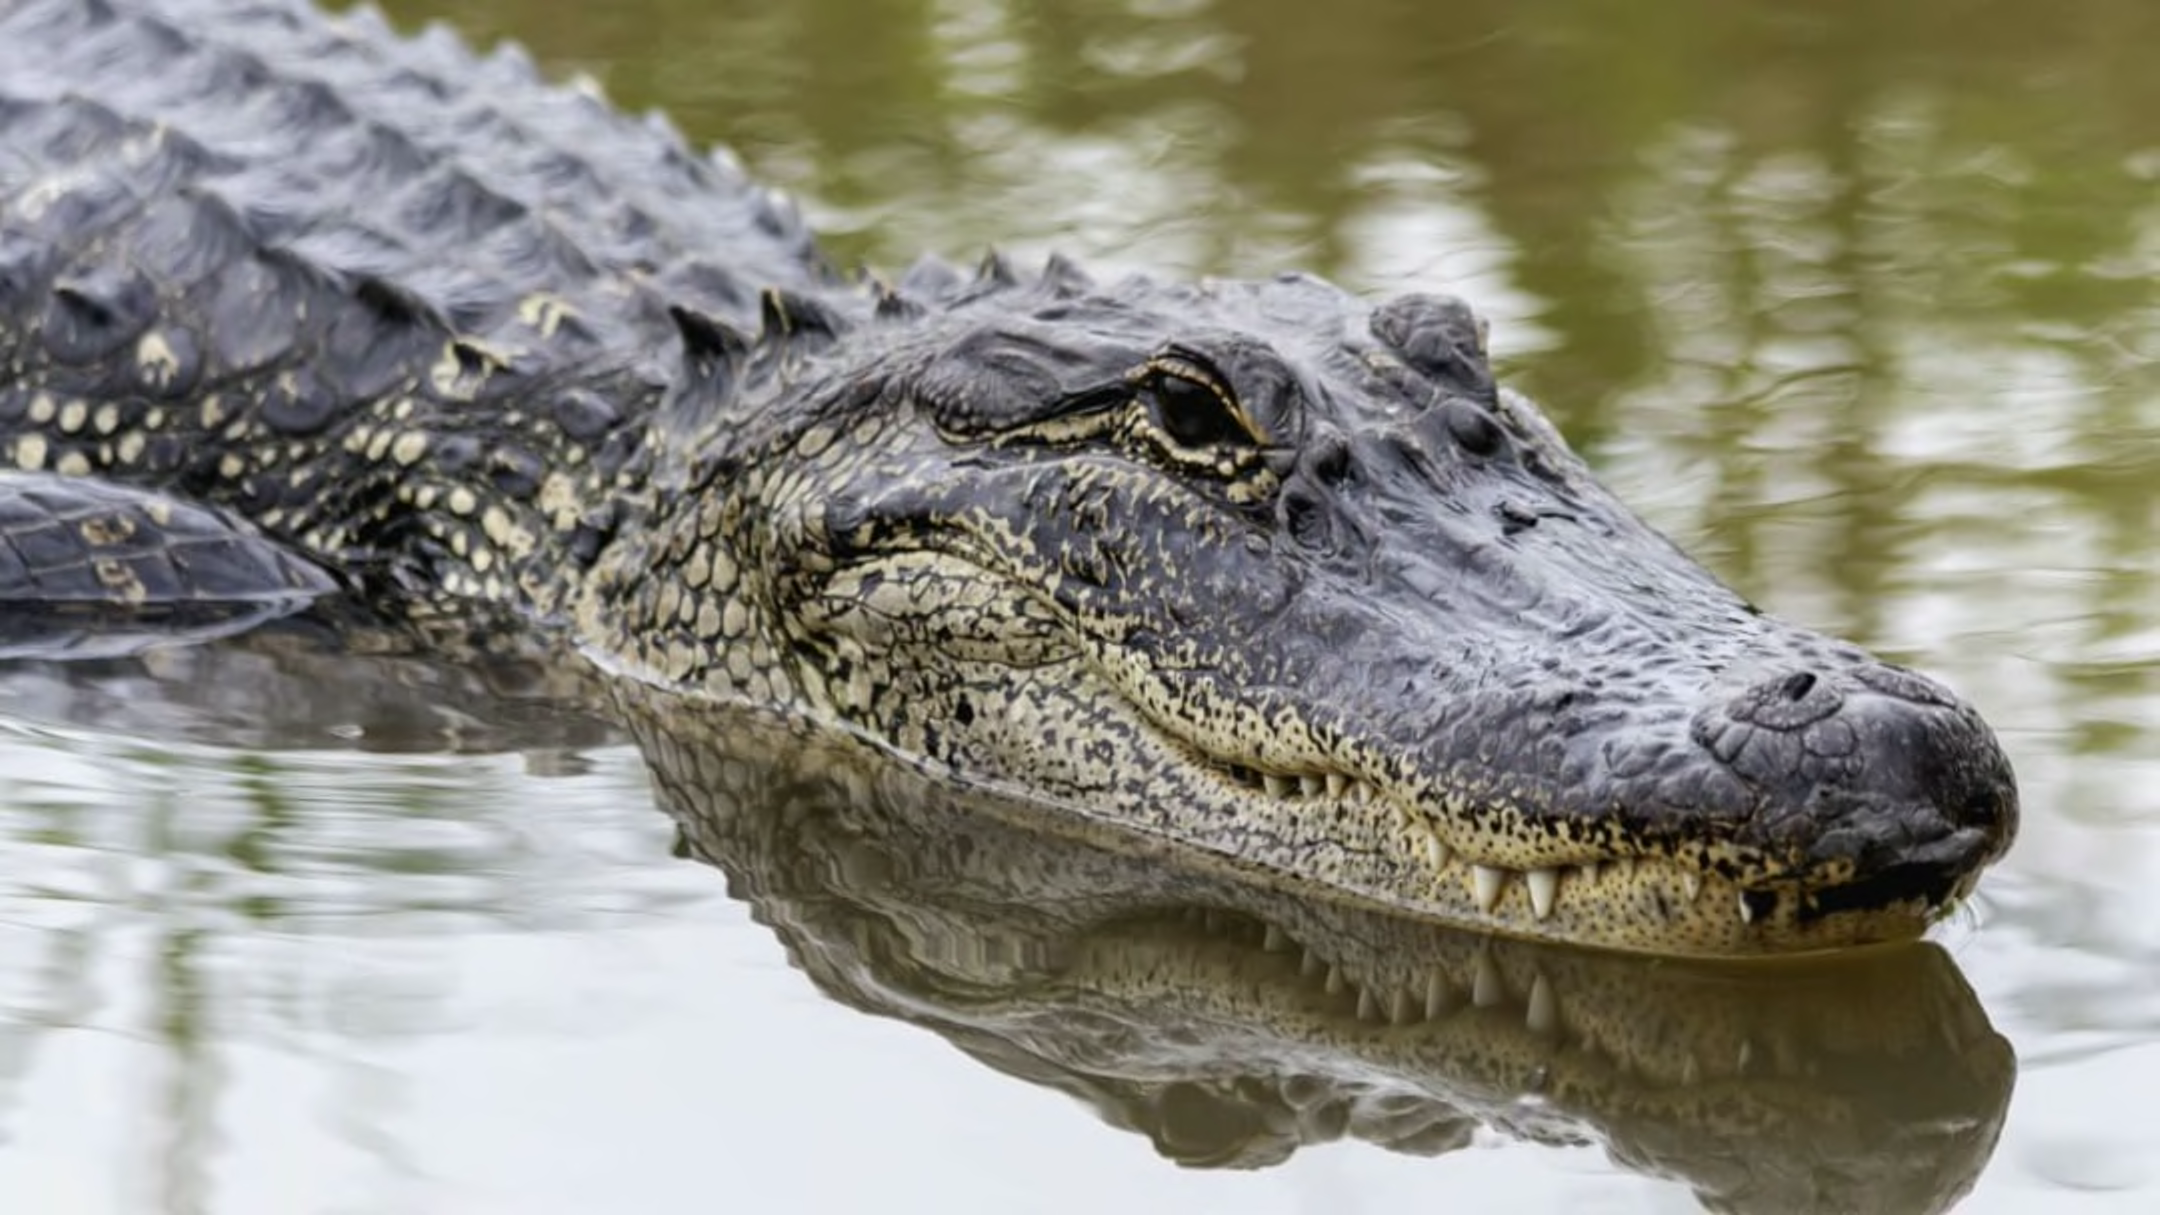 Alligator drifting in the water